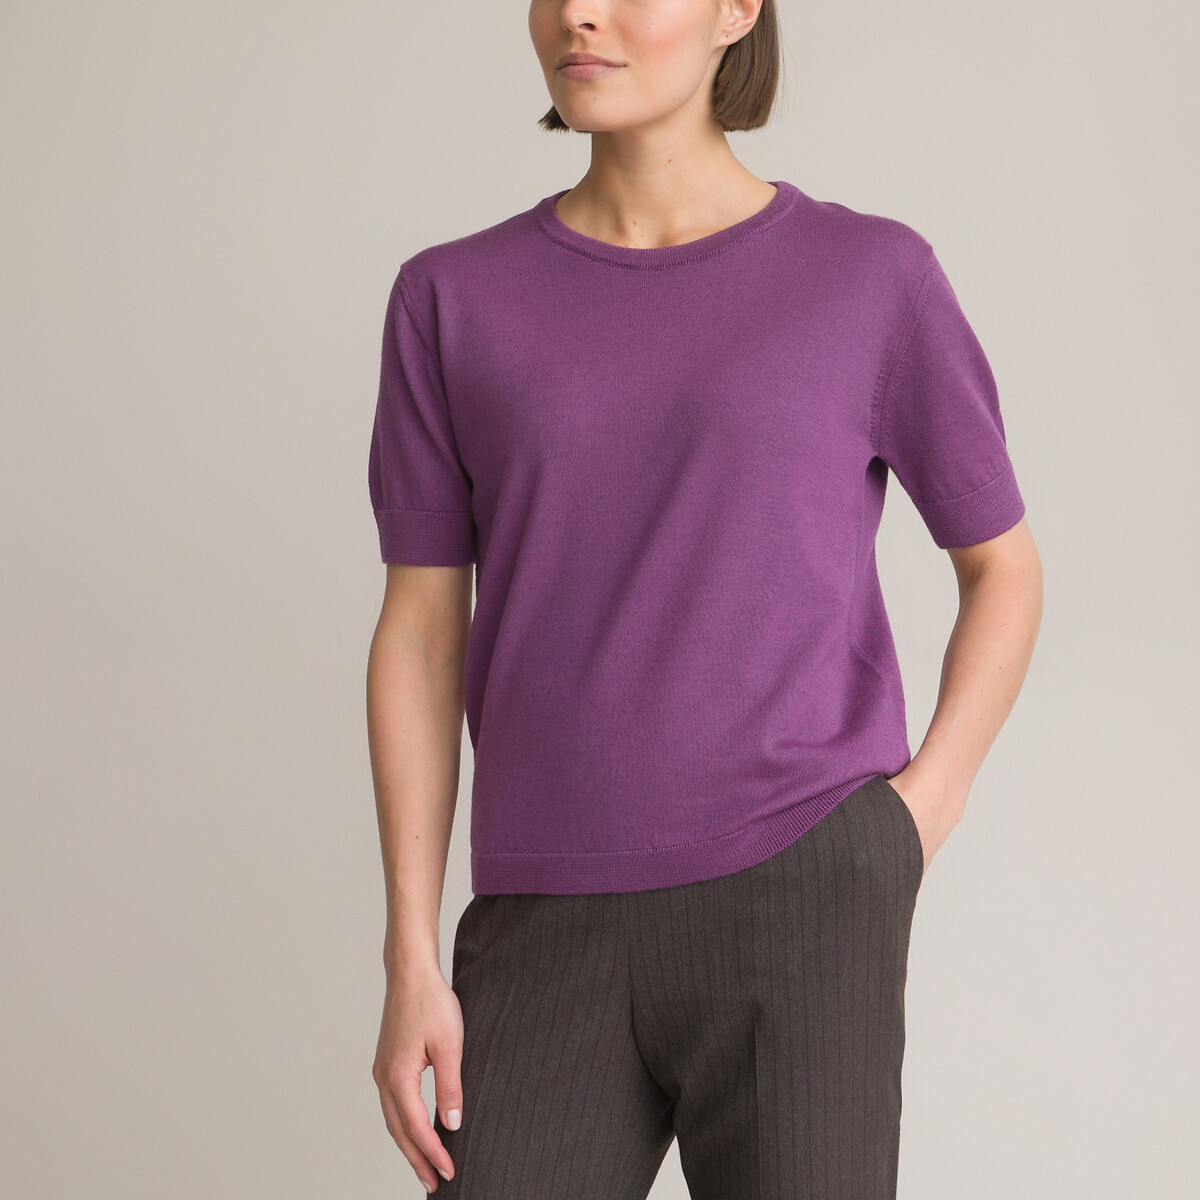 Wool Mix Jumper with Short Sleeves and Crew Neck